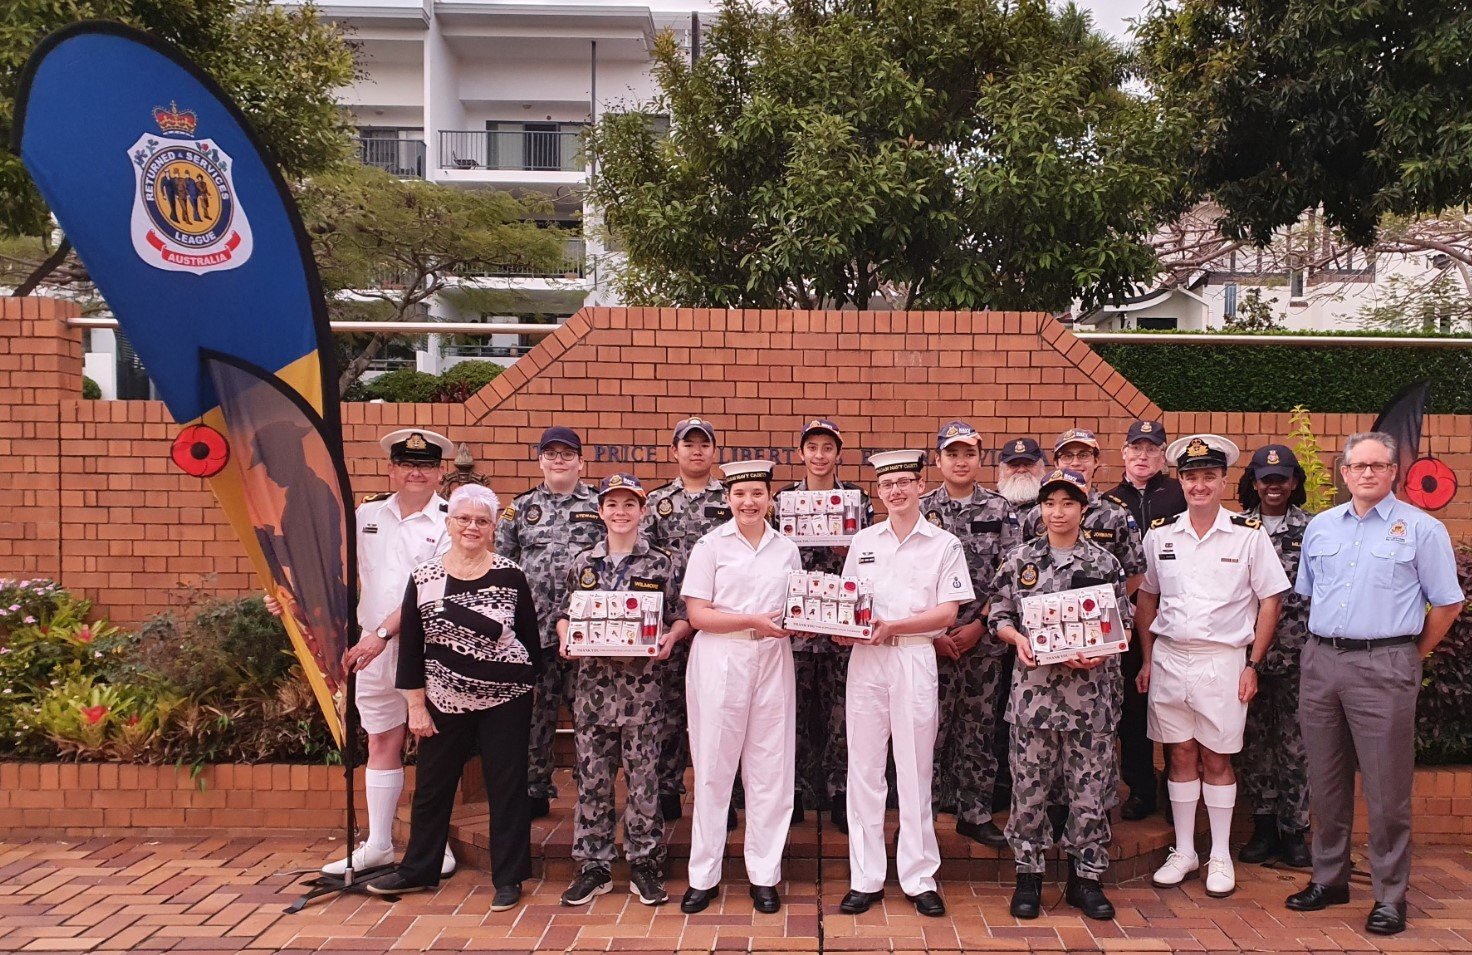 1. City-New Farm RSL Sub-Branch 2022 Remembrance Day Fundraising